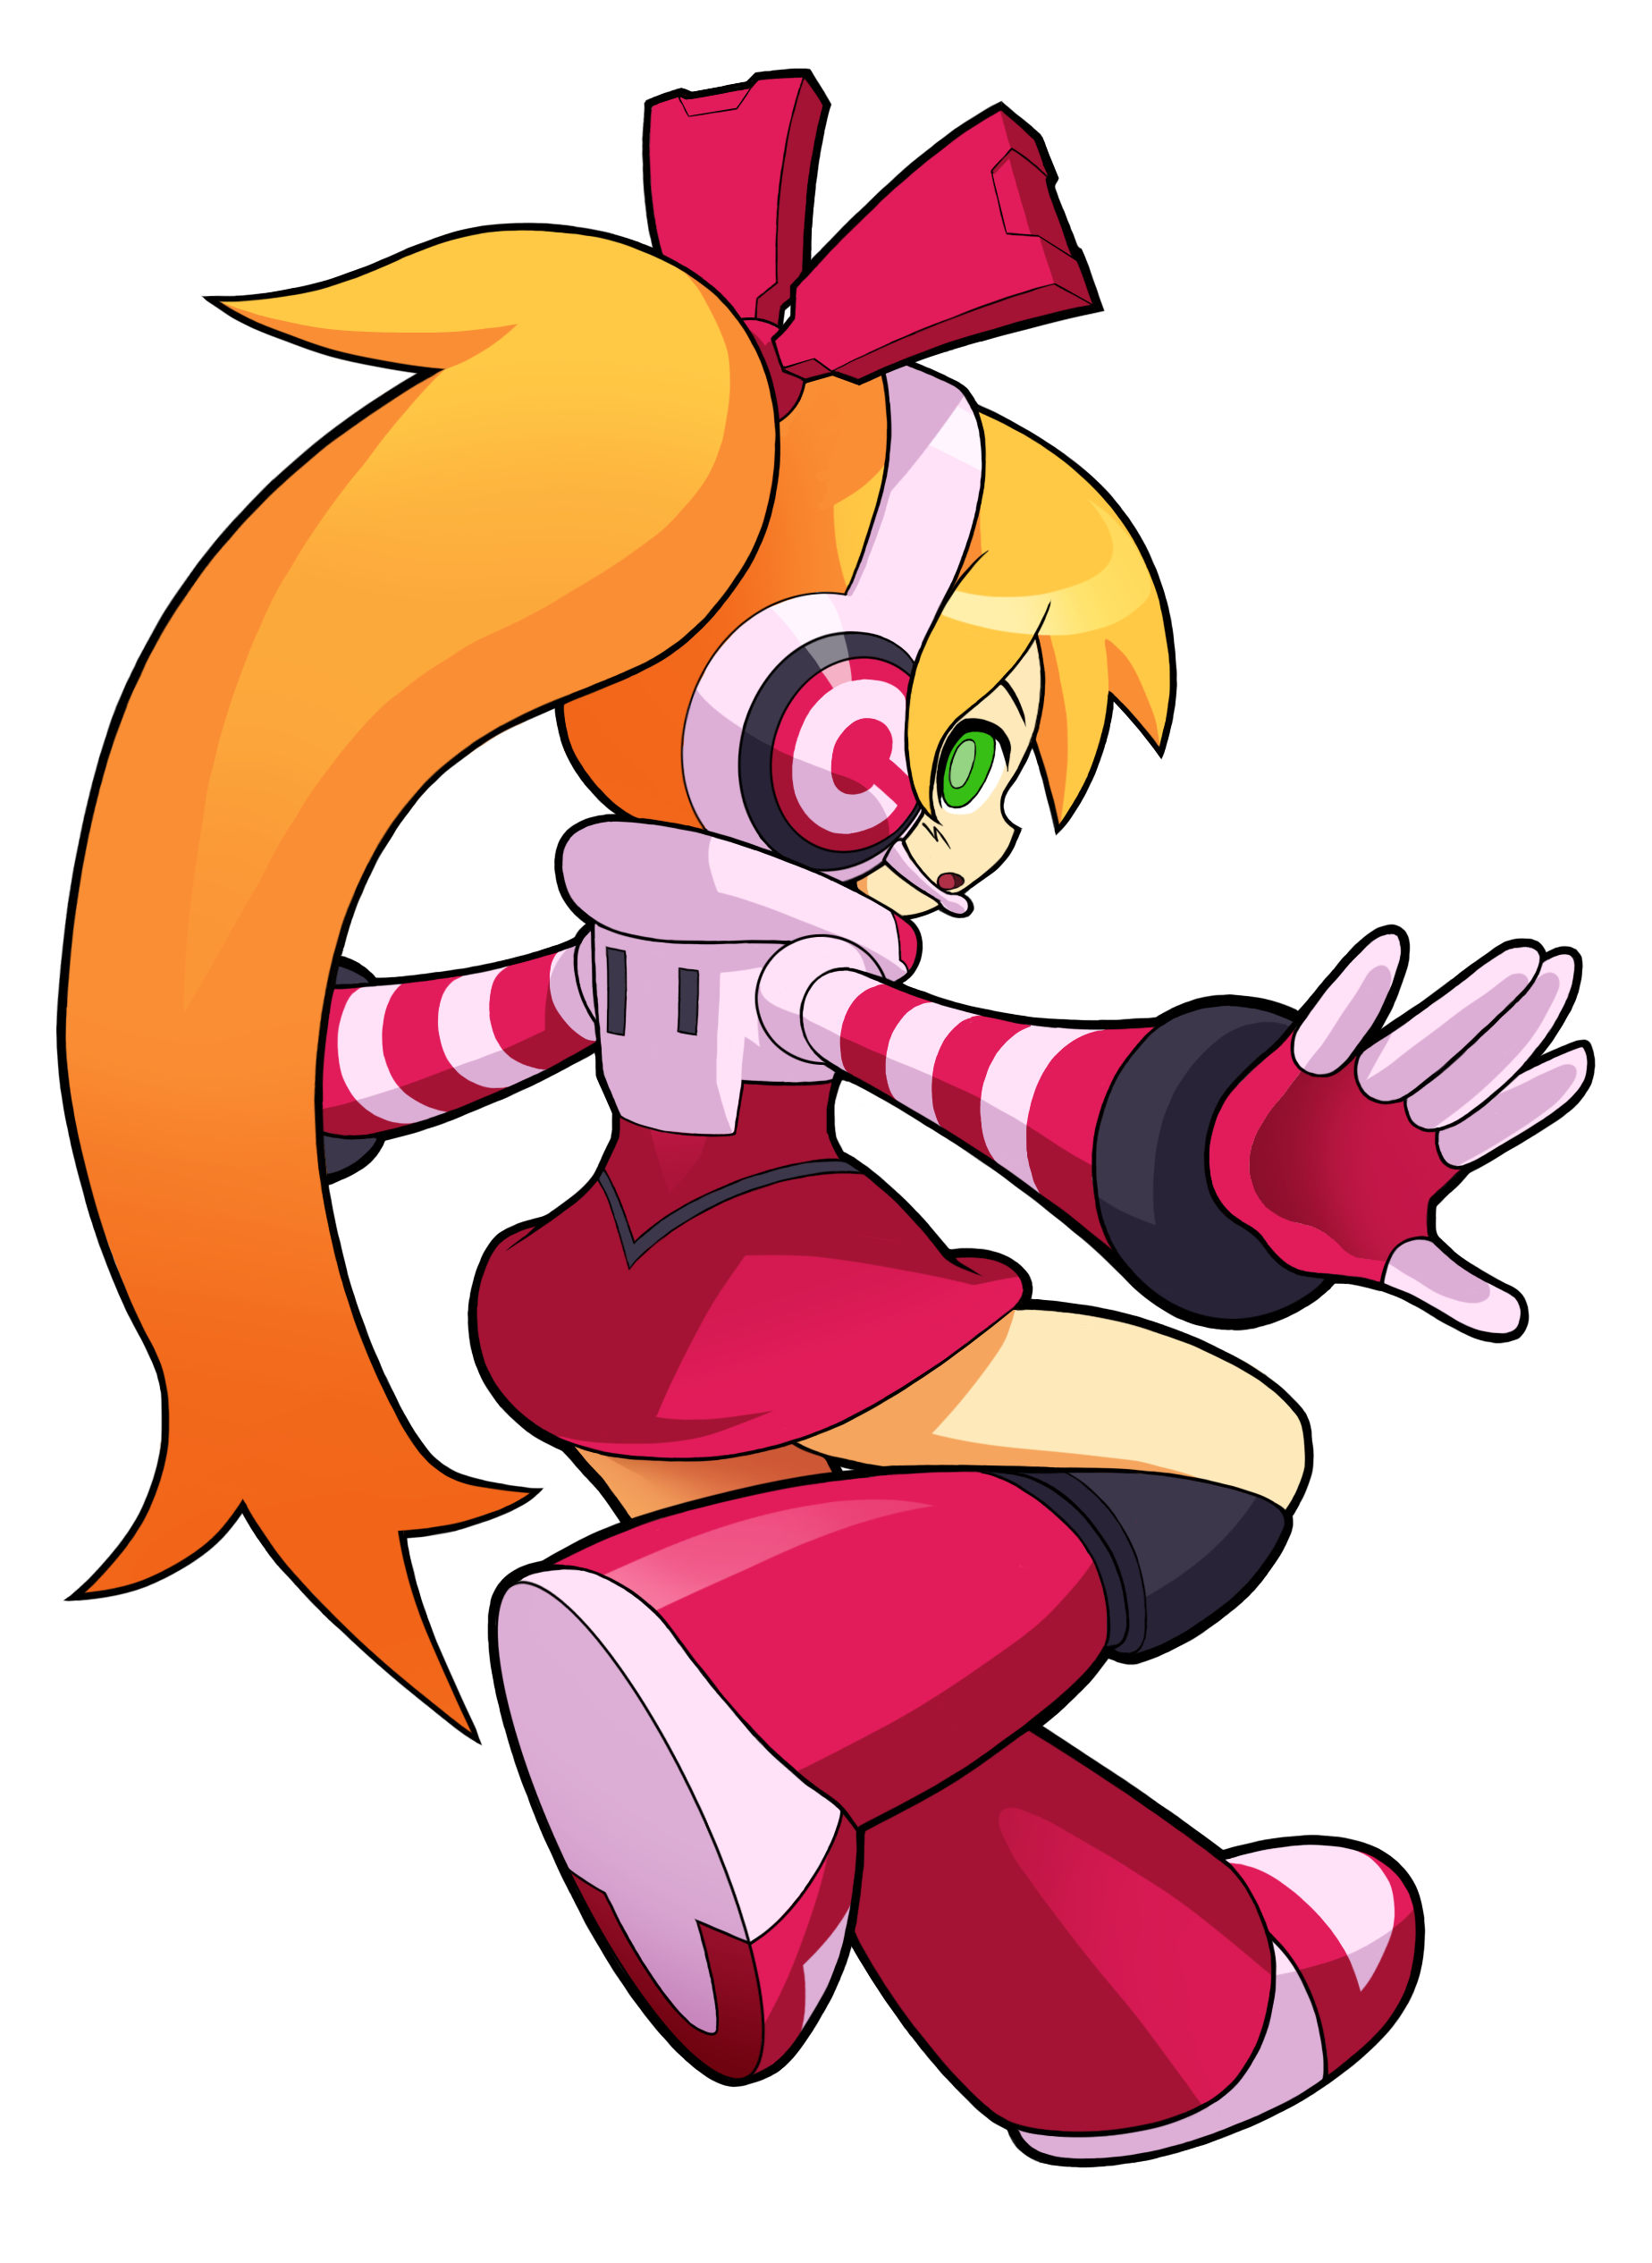 Image Call Artwork 3png Mighty No 9 Wiki Fandom Powered By Wikia 6443